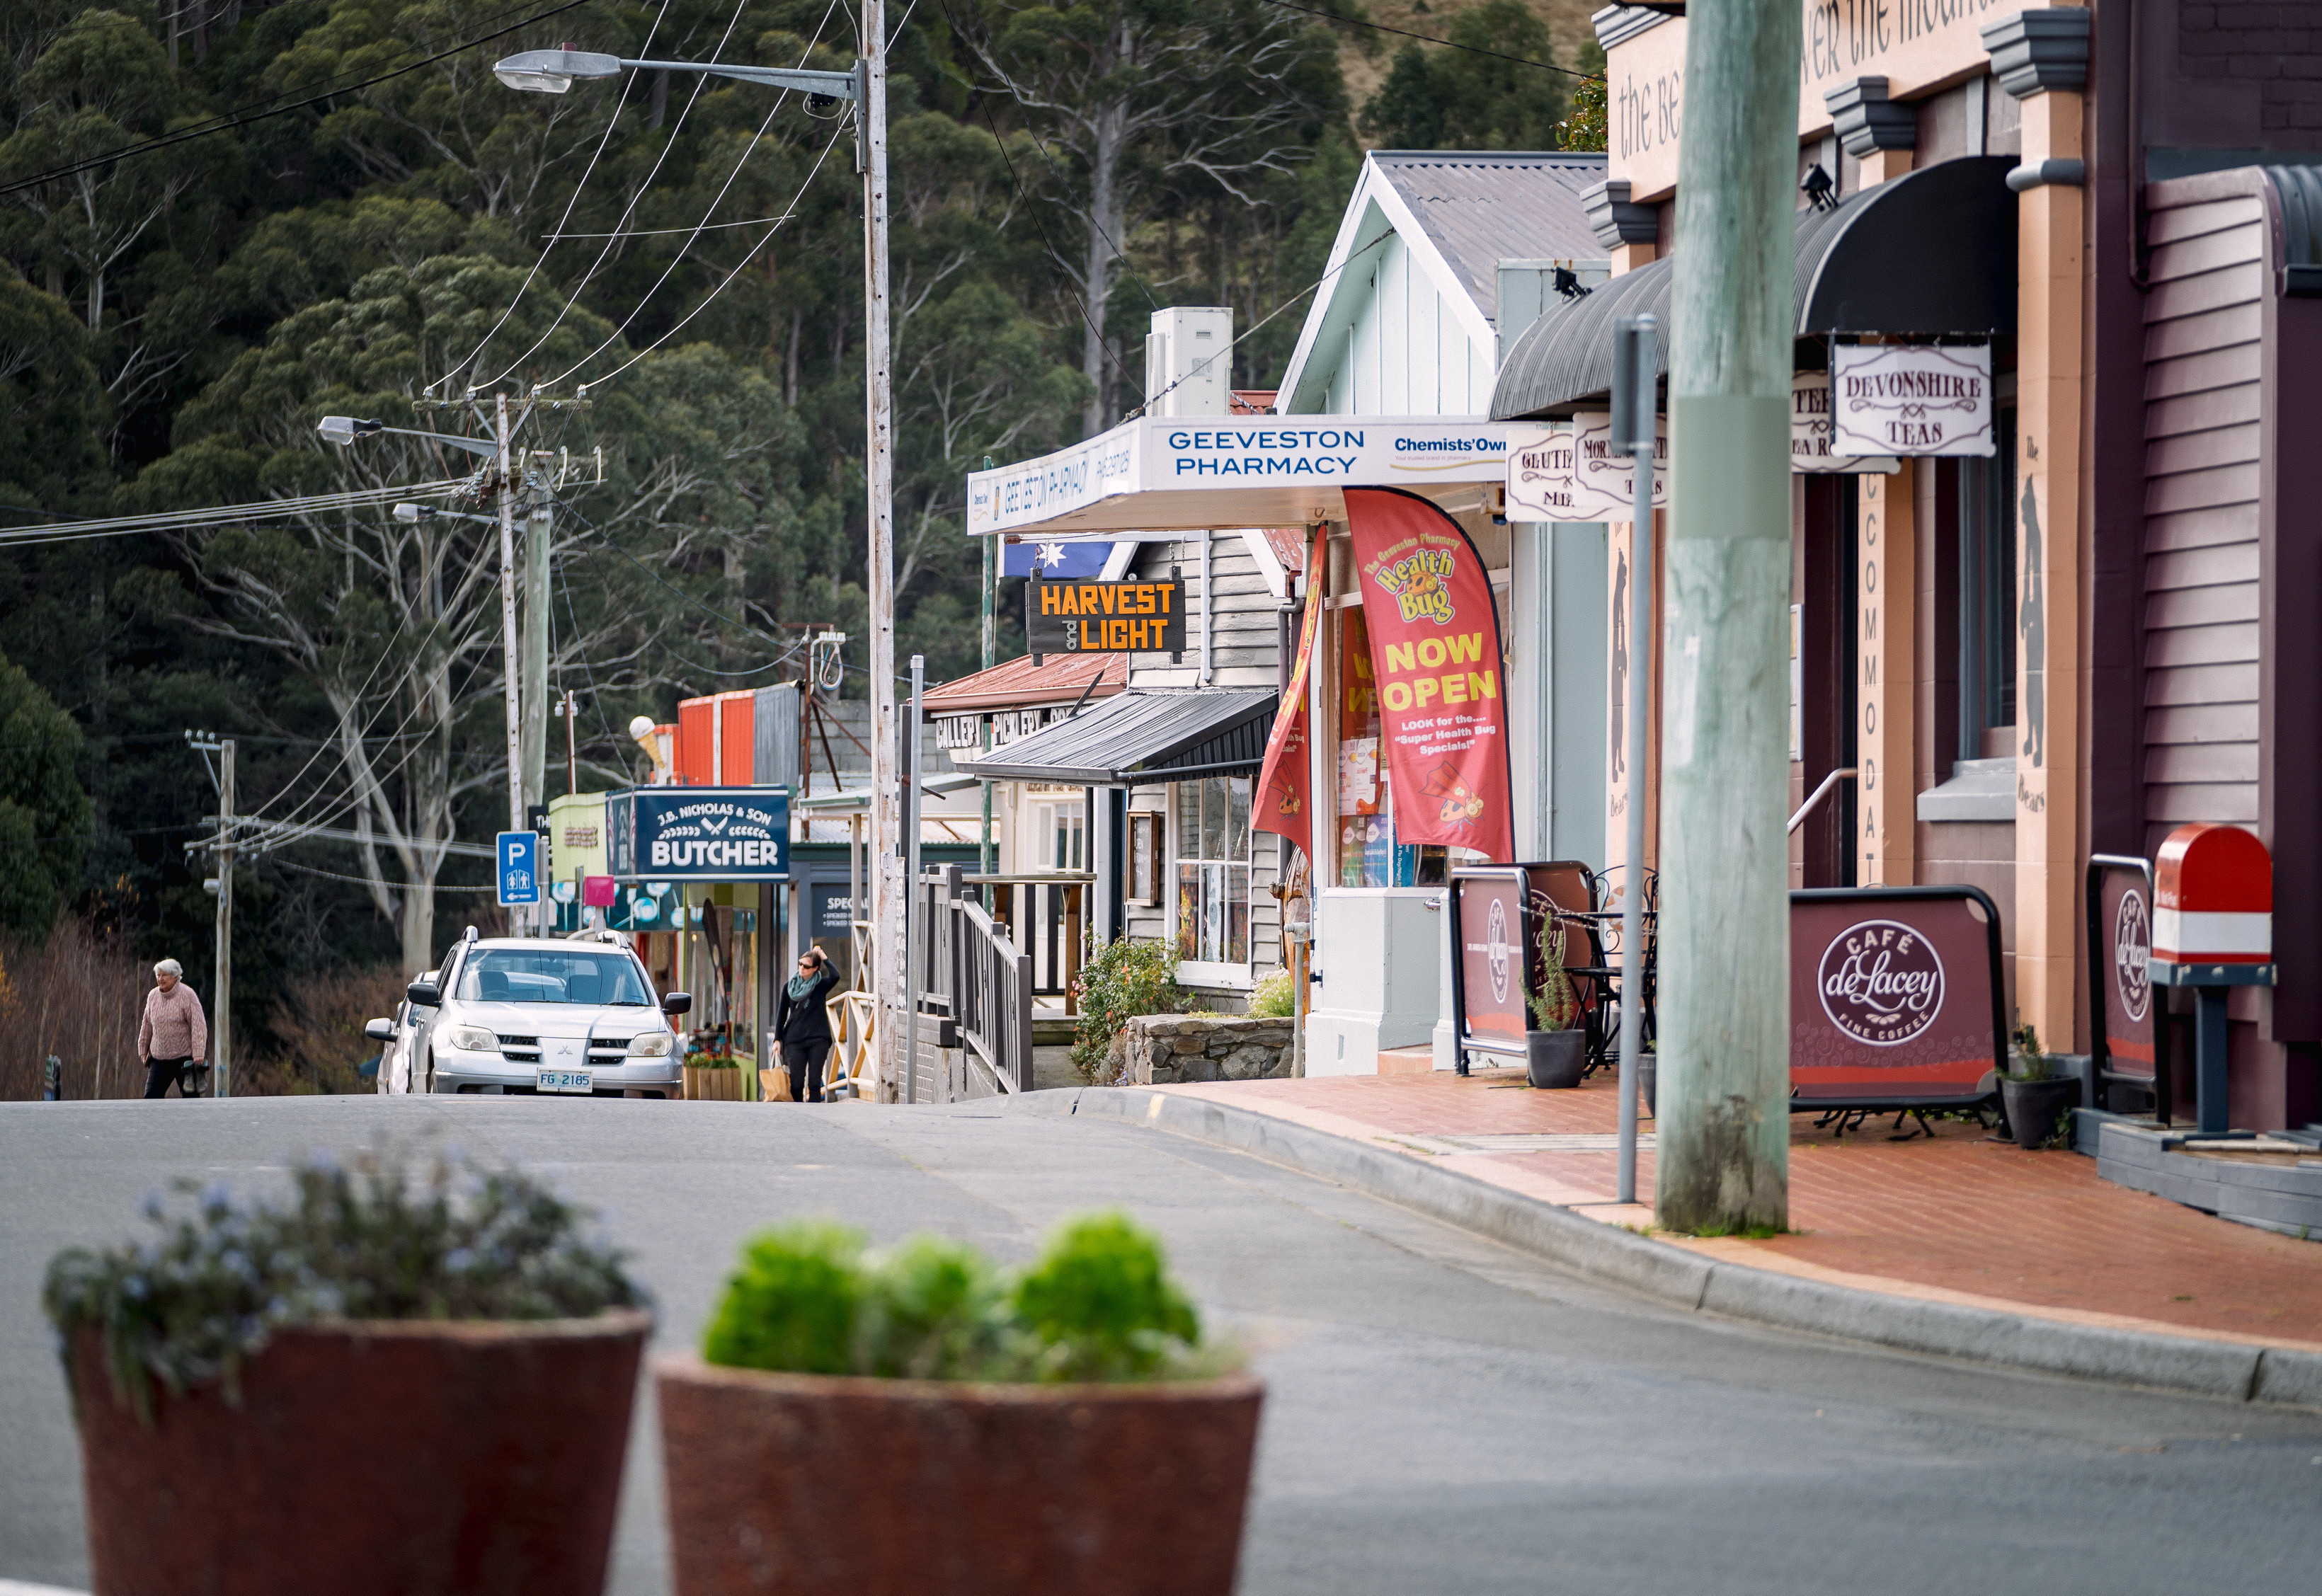 Looking down the main street in Geeveston, a small township in the lower reaches of the Huon Valley.